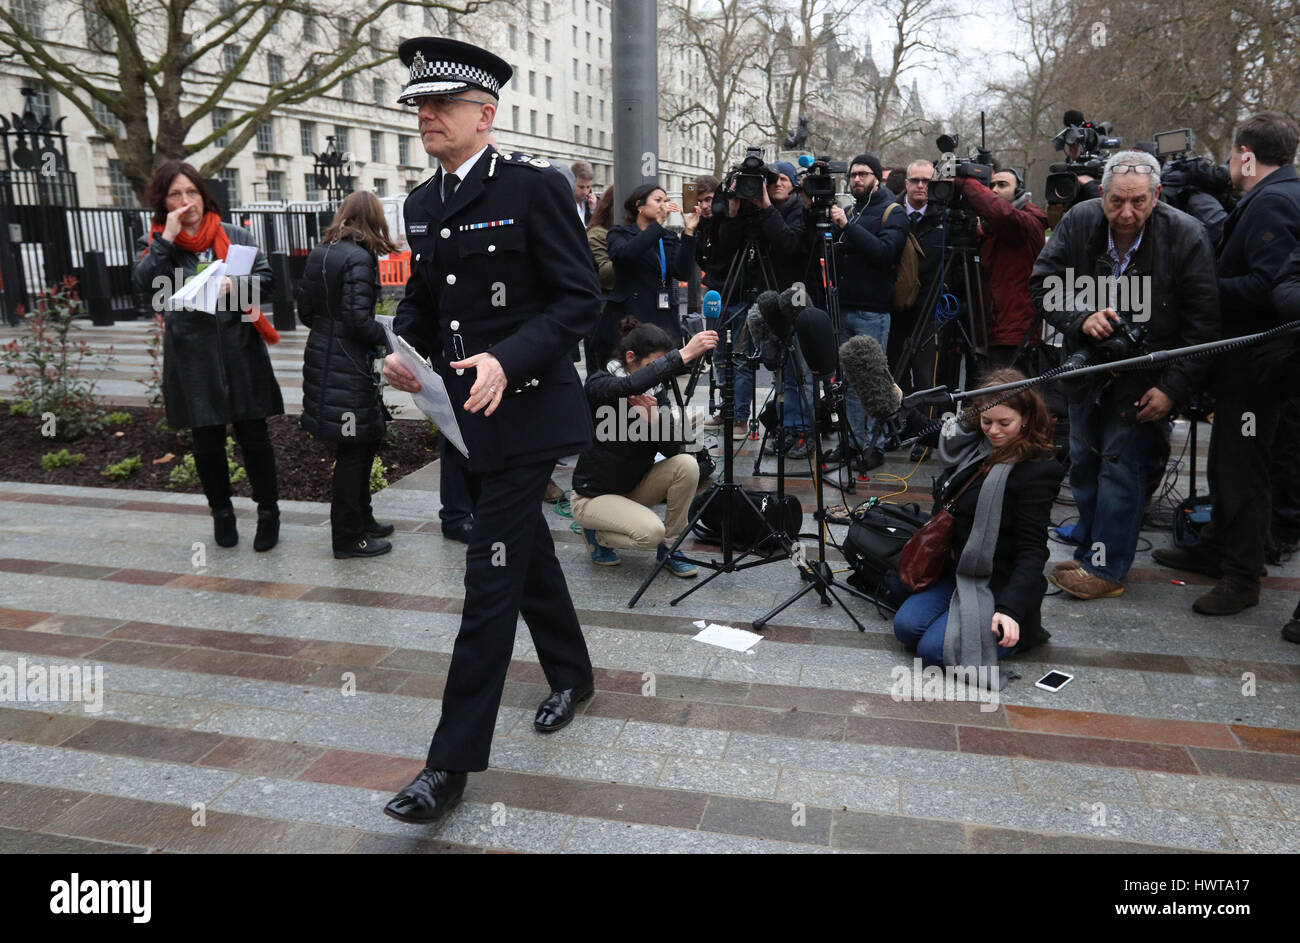 Mark Rowley, Assistant Commissioner for Specialist Operations in the Metropolitan Police, after speaking outside Scotland Yard in London, the day after a terrorist attack where police officer Keith Palmer and three members of the public died and the attacker was shot dead. Stock Photo